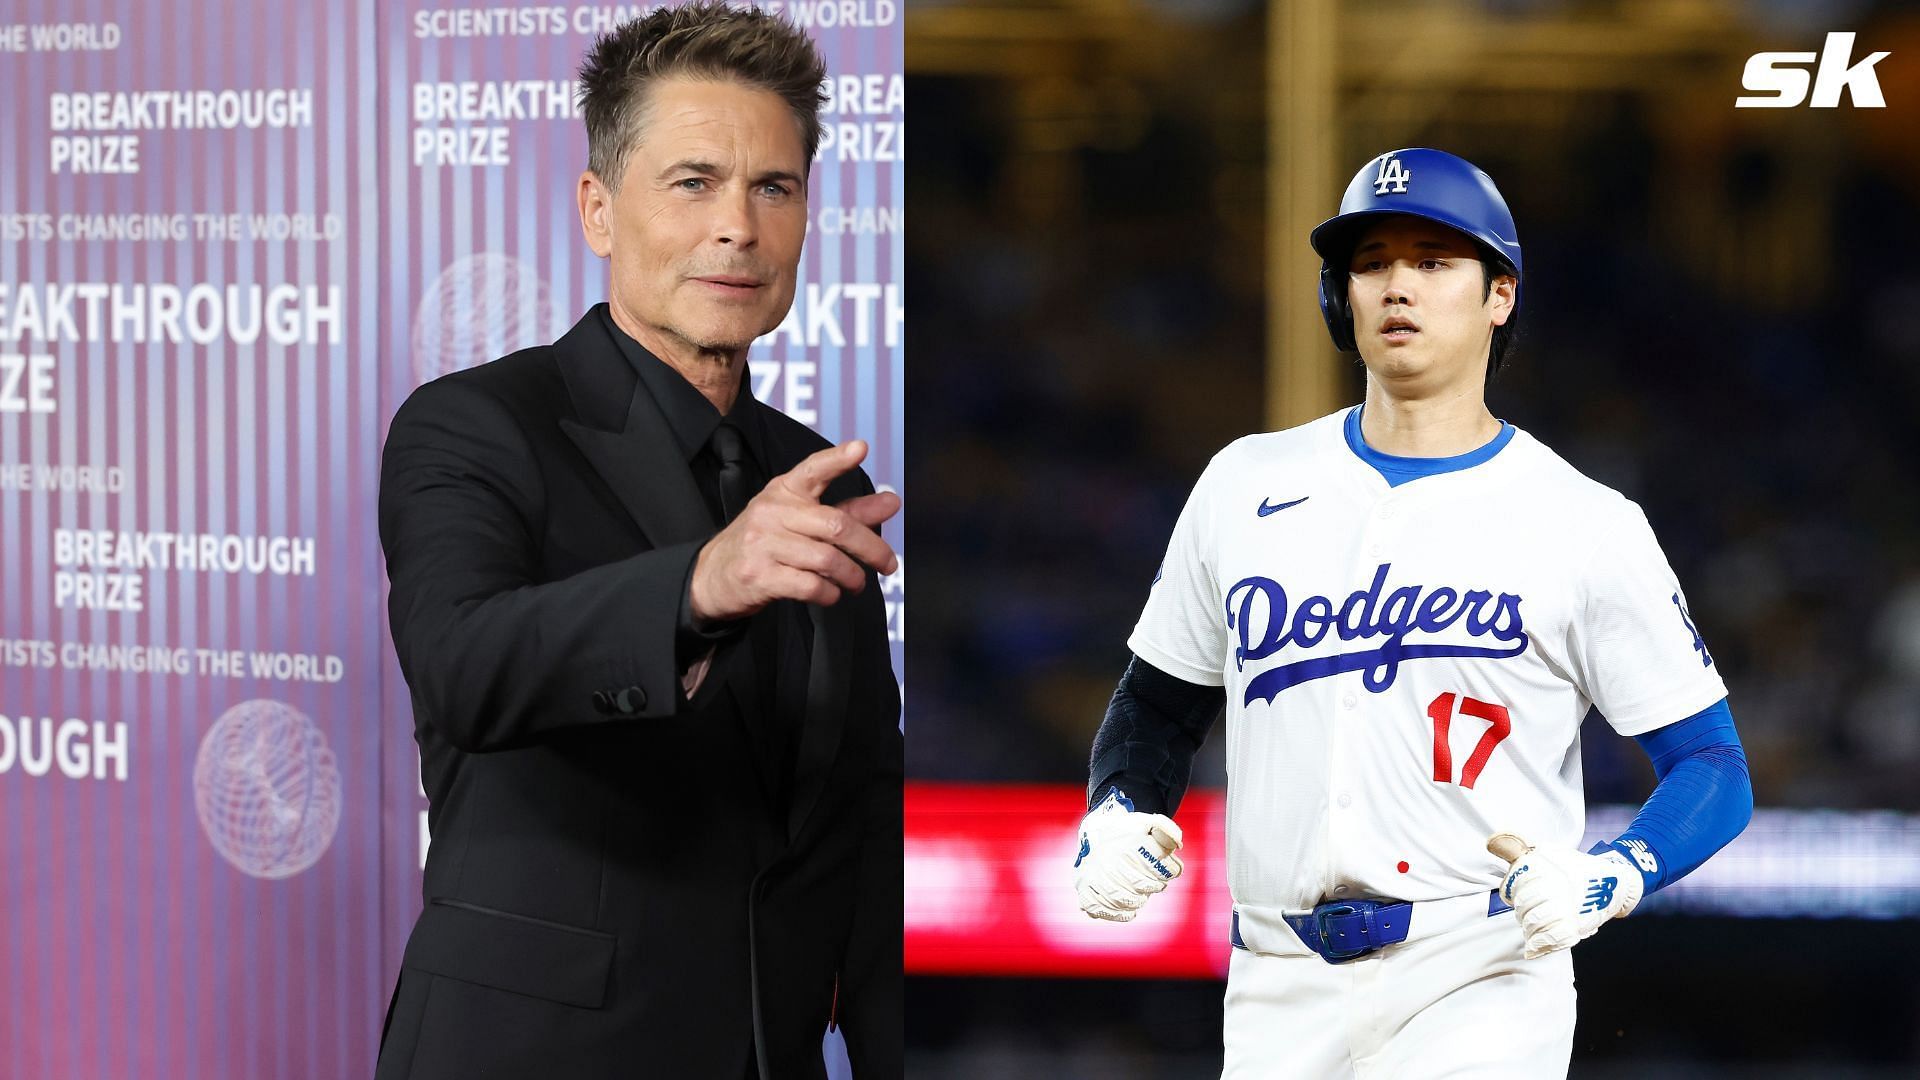 Actor Rob Lowe was all praise for Shohei Ohtani